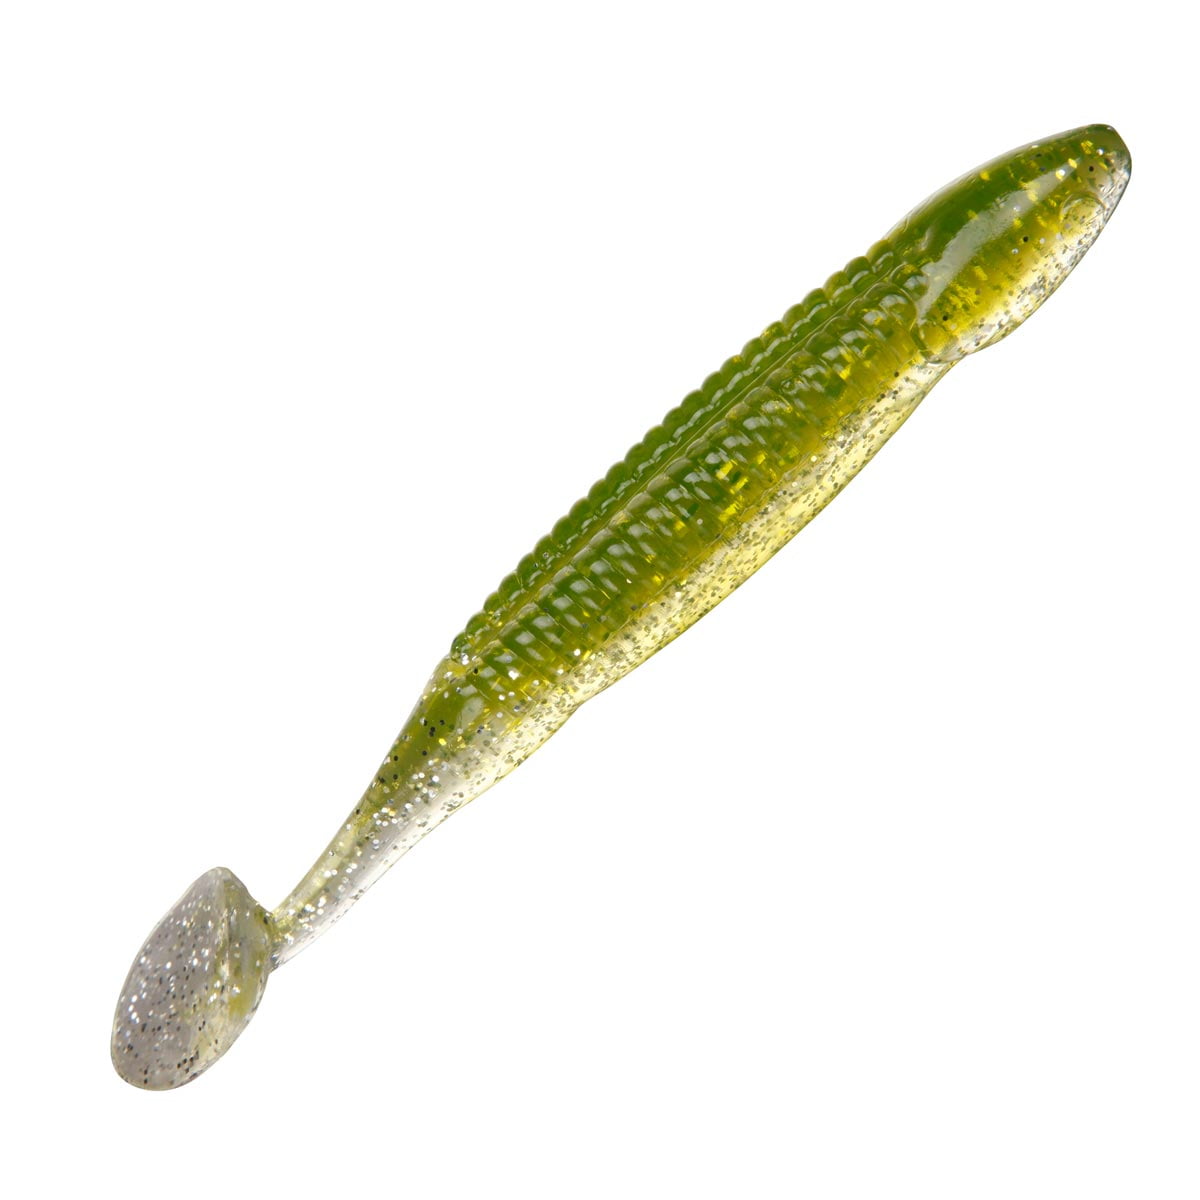 Charlie's Worms Zipper Dipper, Scented, Soft Bait for Freshwater and  Saltwater Fishing 6pk 